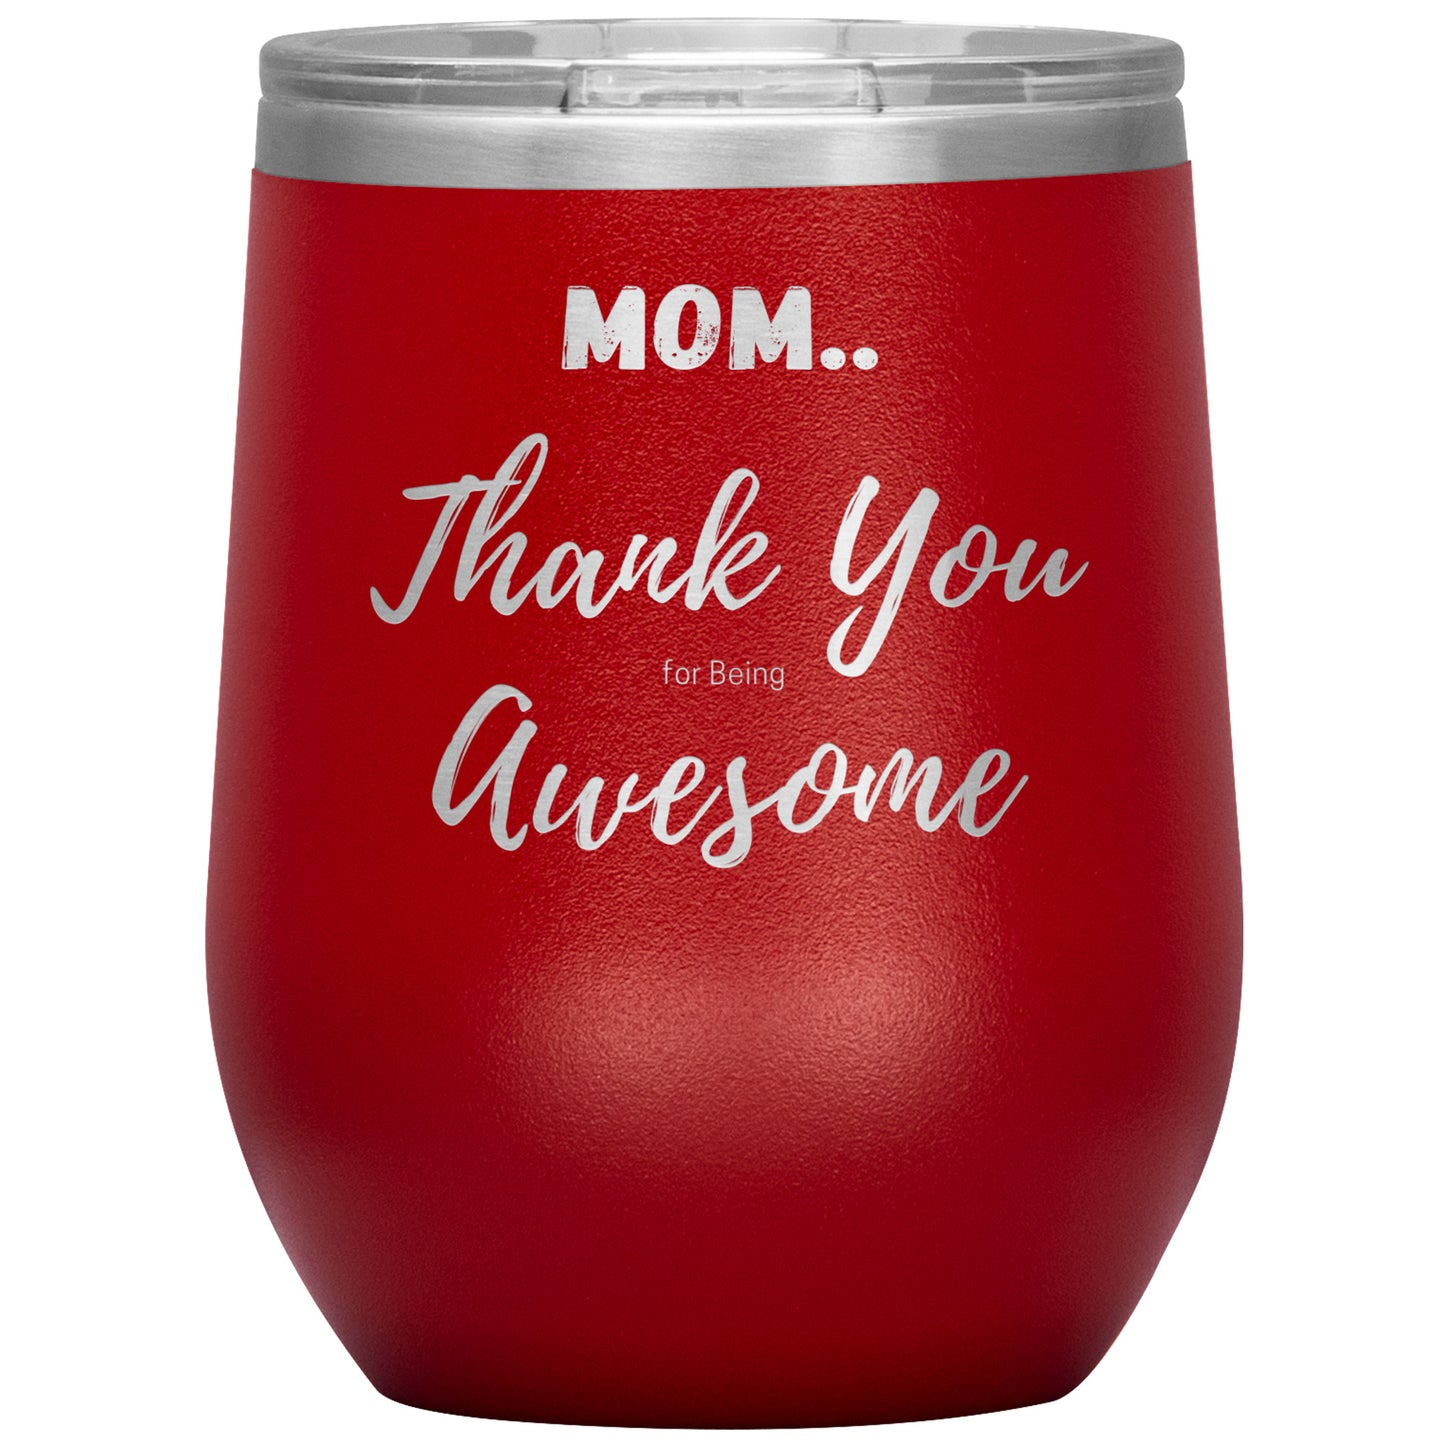 Mom Thank you for being awesome